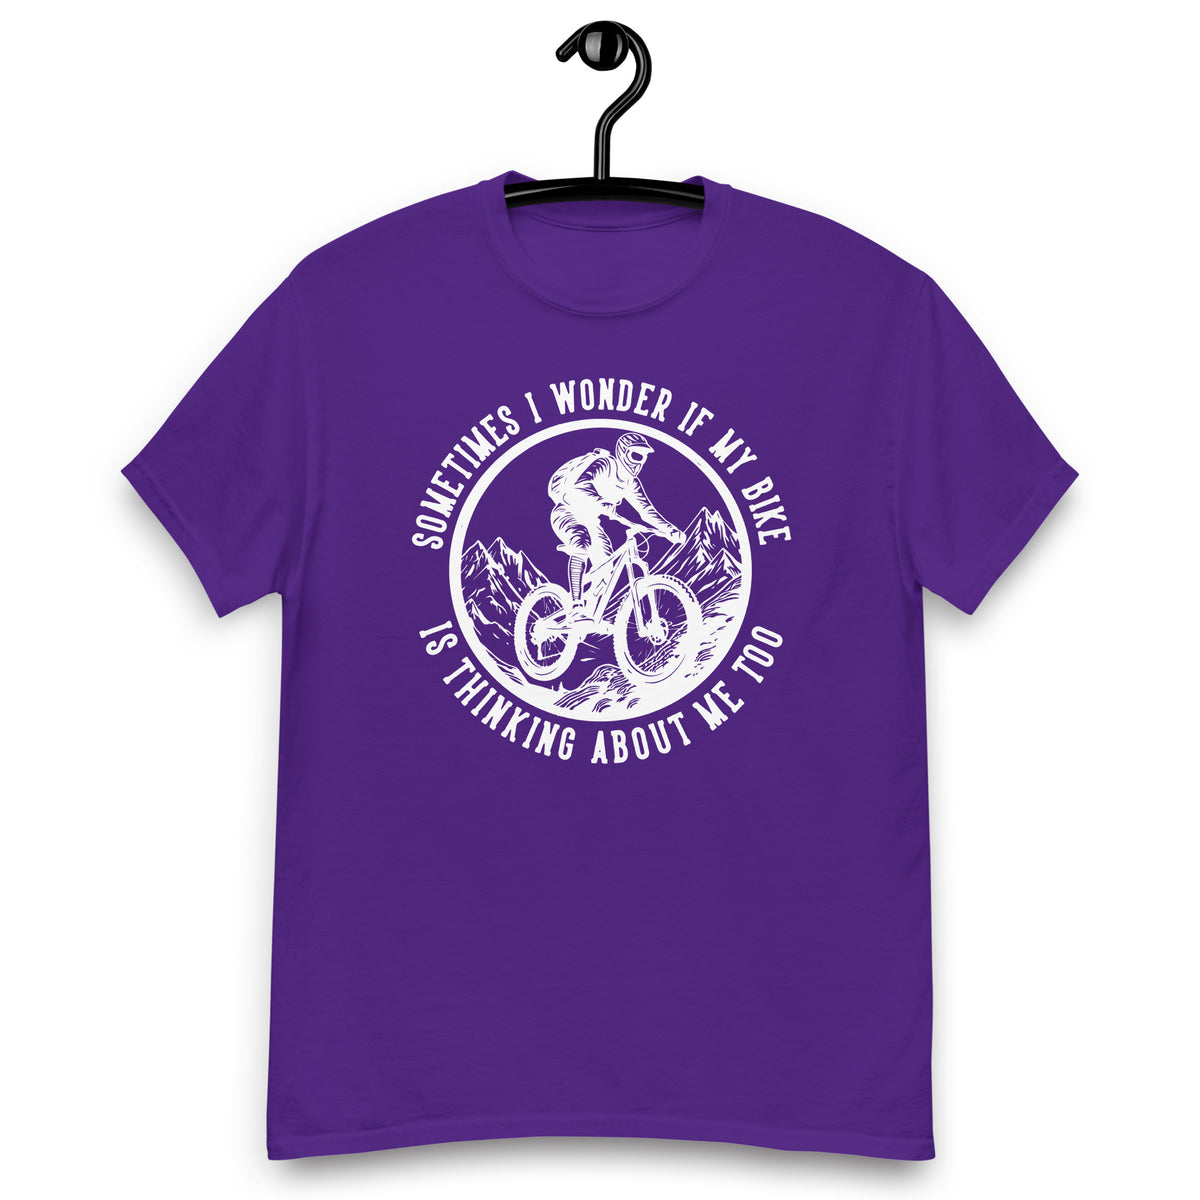 Fahrrad Shirts "Sometimes I Wonder If My Bike Is Thinking About Me Too" Variane 6